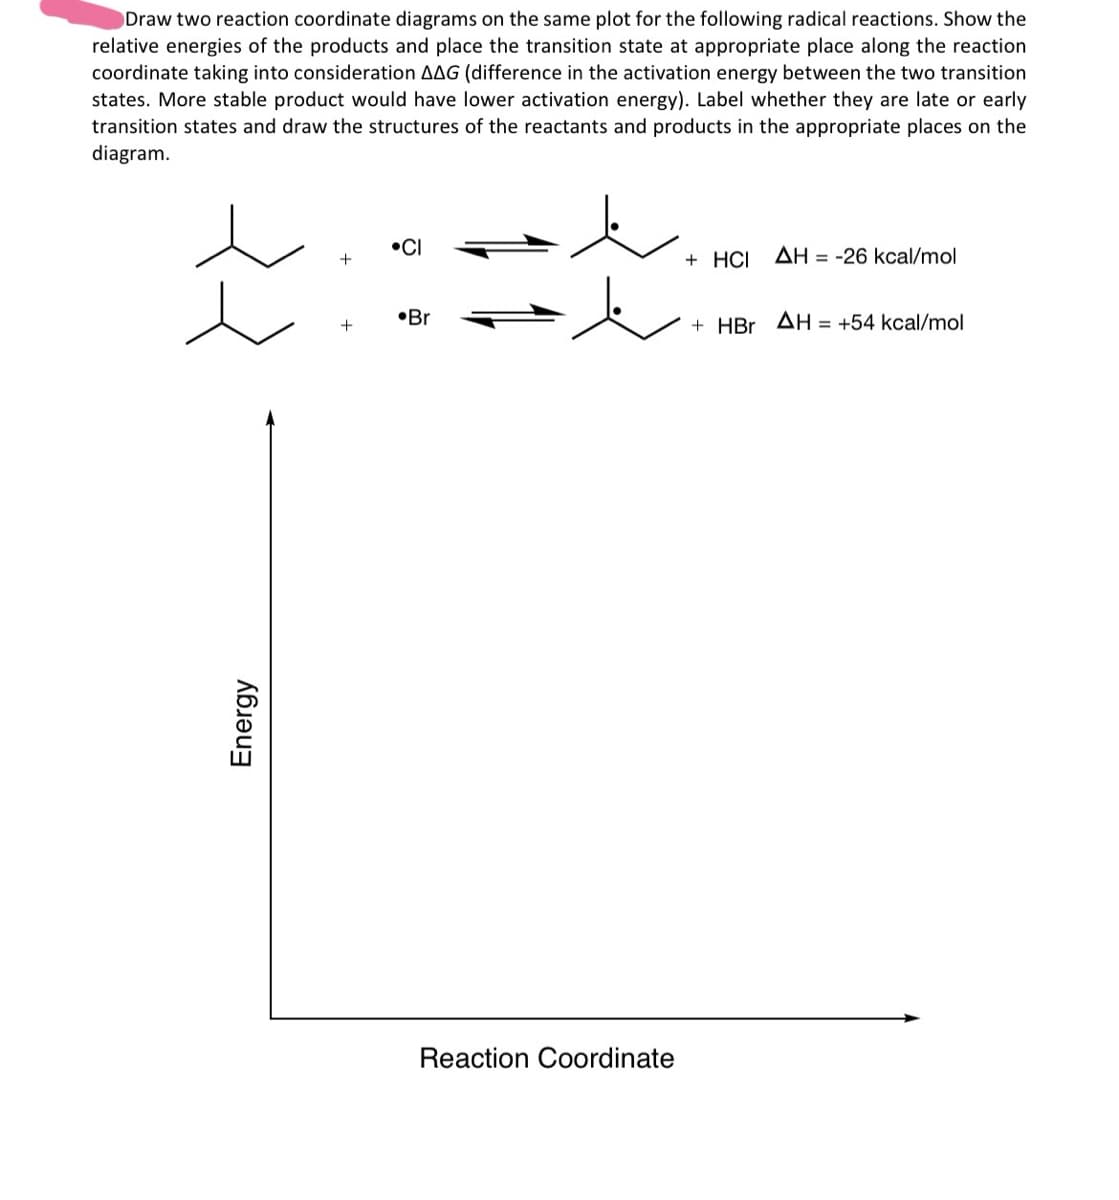 Energy
Draw two reaction coordinate diagrams on the same plot for the following radical reactions. Show the
relative energies of the products and place the transition state at appropriate place along the reaction
coordinate taking into consideration AAG (difference in the activation energy between the two transition
states. More stable product would have lower activation energy). Label whether they are late or early
transition states and draw the structures of the reactants and products in the appropriate places on the
diagram.
소::
+ HCI
AH-26 kcal/mol
+ HBr AH = +54 kcal/mol
Reaction Coordinate